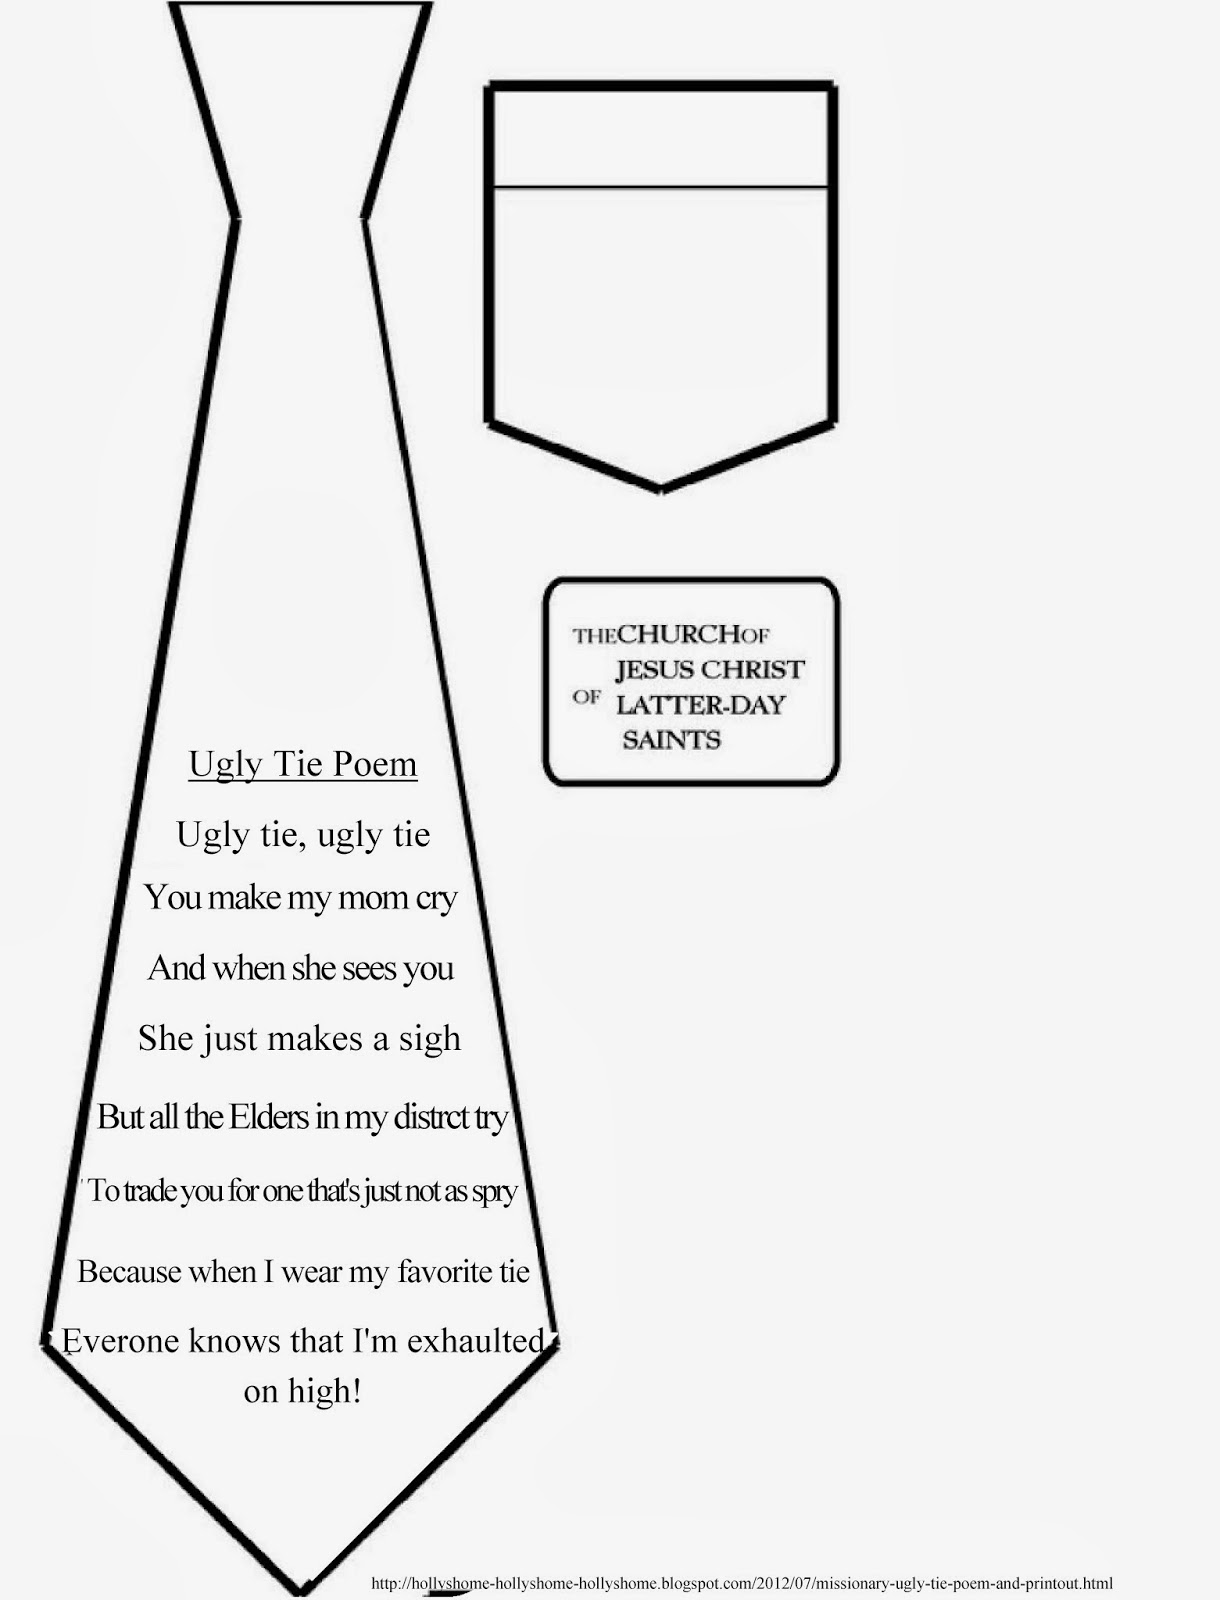 HollysHome - Church Fun: Missionary Ugly Tie Poem and Printout